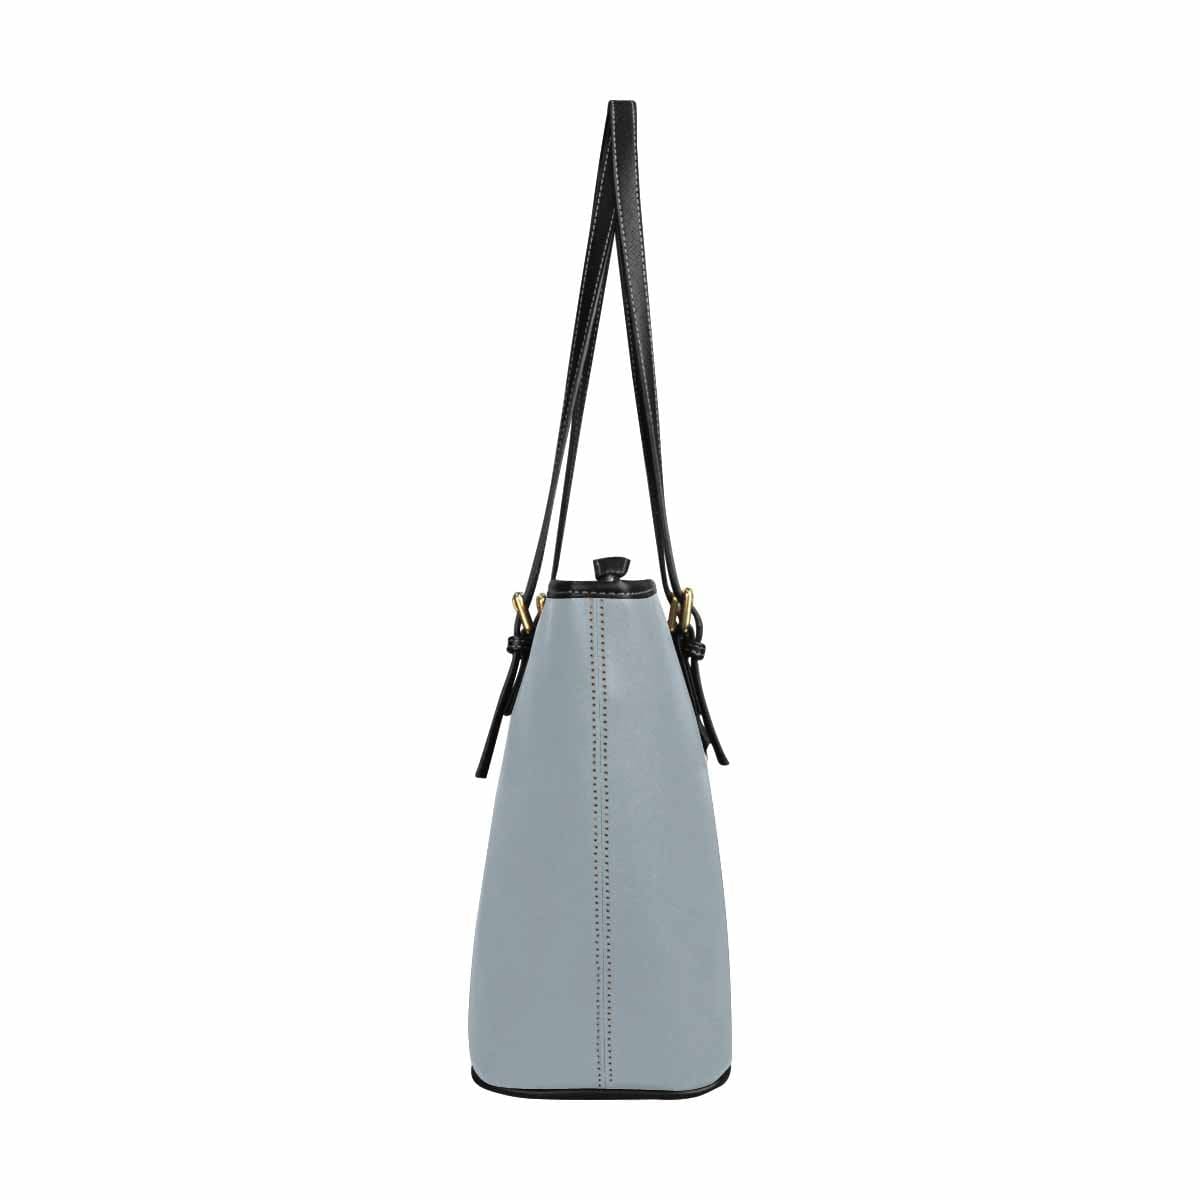 Large Leather Tote Shoulder Bag - Misty Blue Gray - Bags | Leather Tote Bags